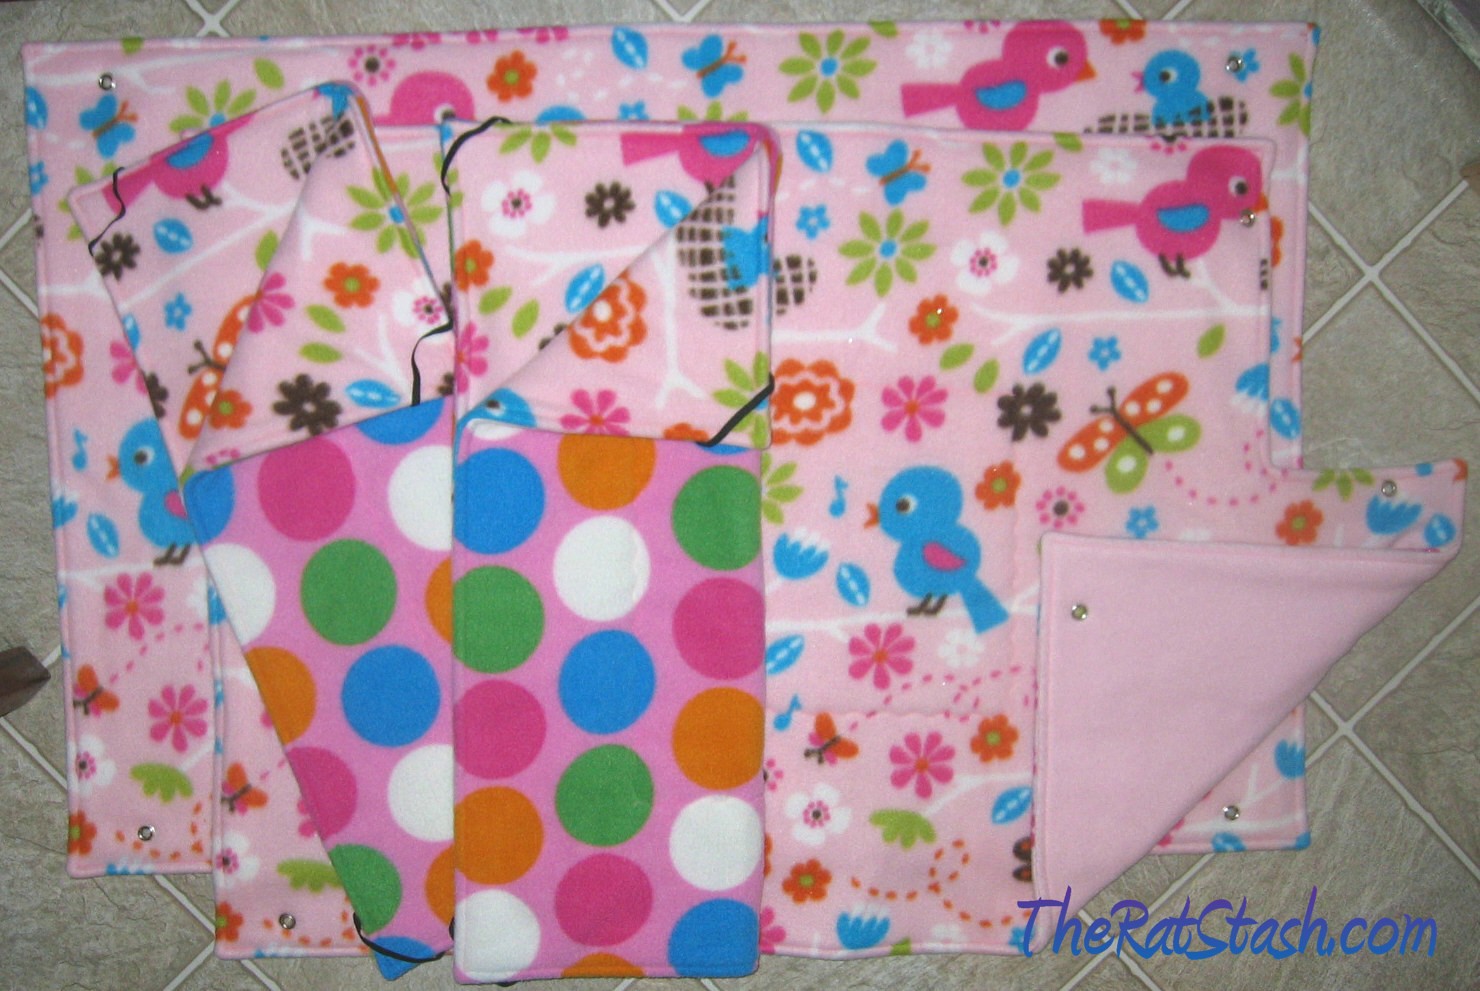 For Mary: Double FN/CN Liners w/ terrycloth padding in "circles/flowers girl fabric"